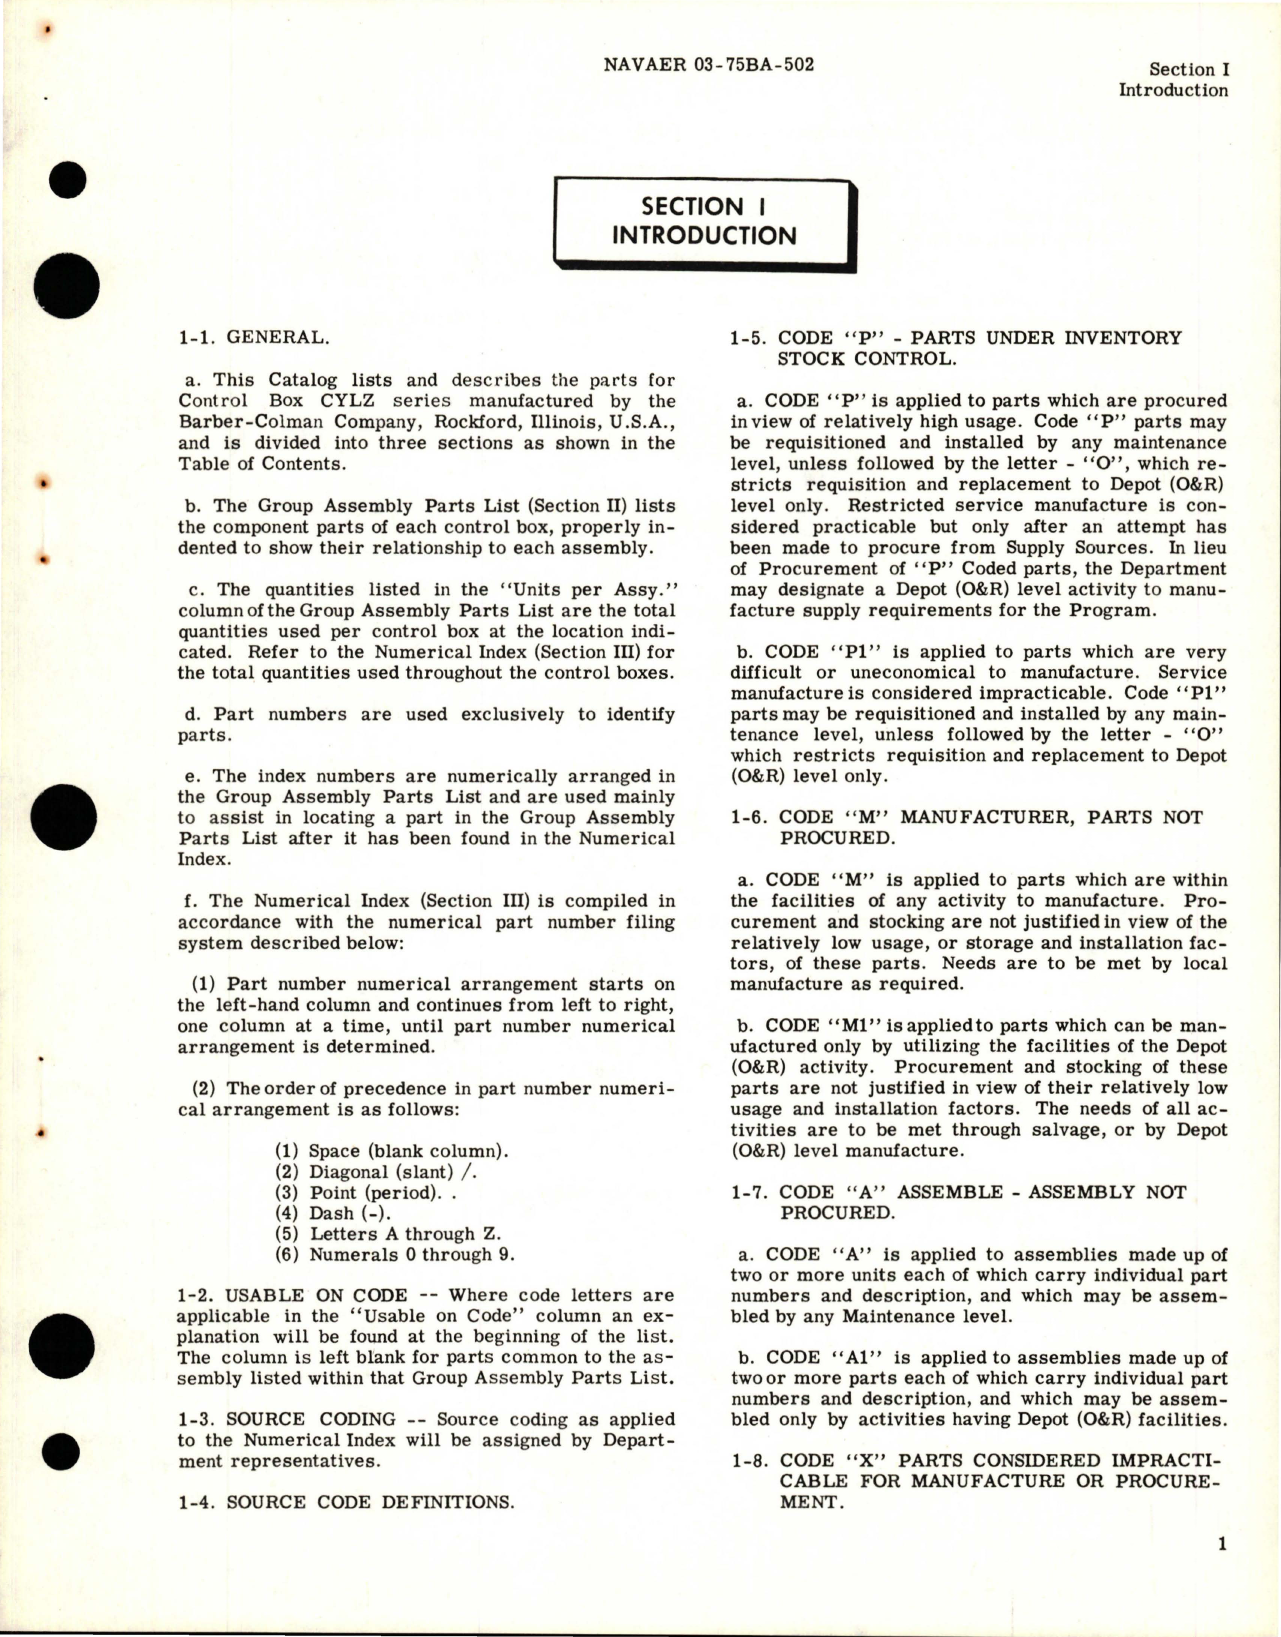 Sample page 5 from AirCorps Library document: Illustrated Parts Breakdown for Aircraft Temperature Control System Control Box, Parts CYLZ 3703 and CYLZ 3609